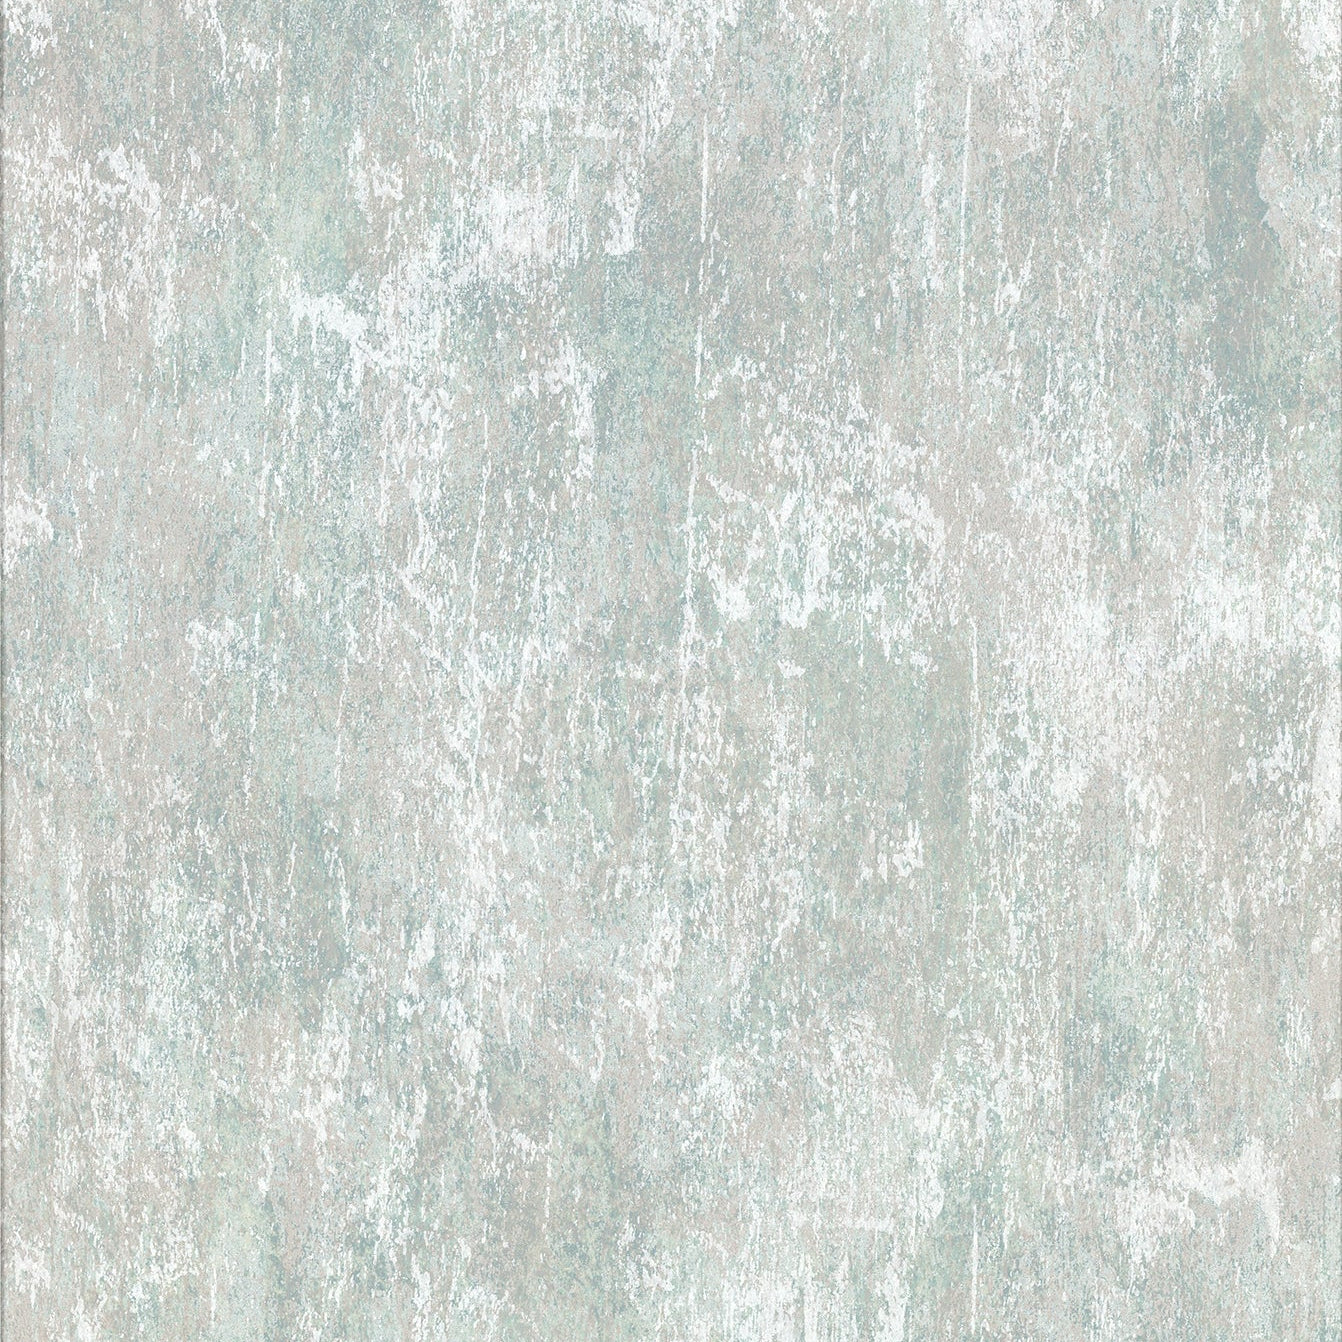 Purchase 2909-DWP0076-02 Riva Bovary Teal Distressed Texture Brewster Wallpaper